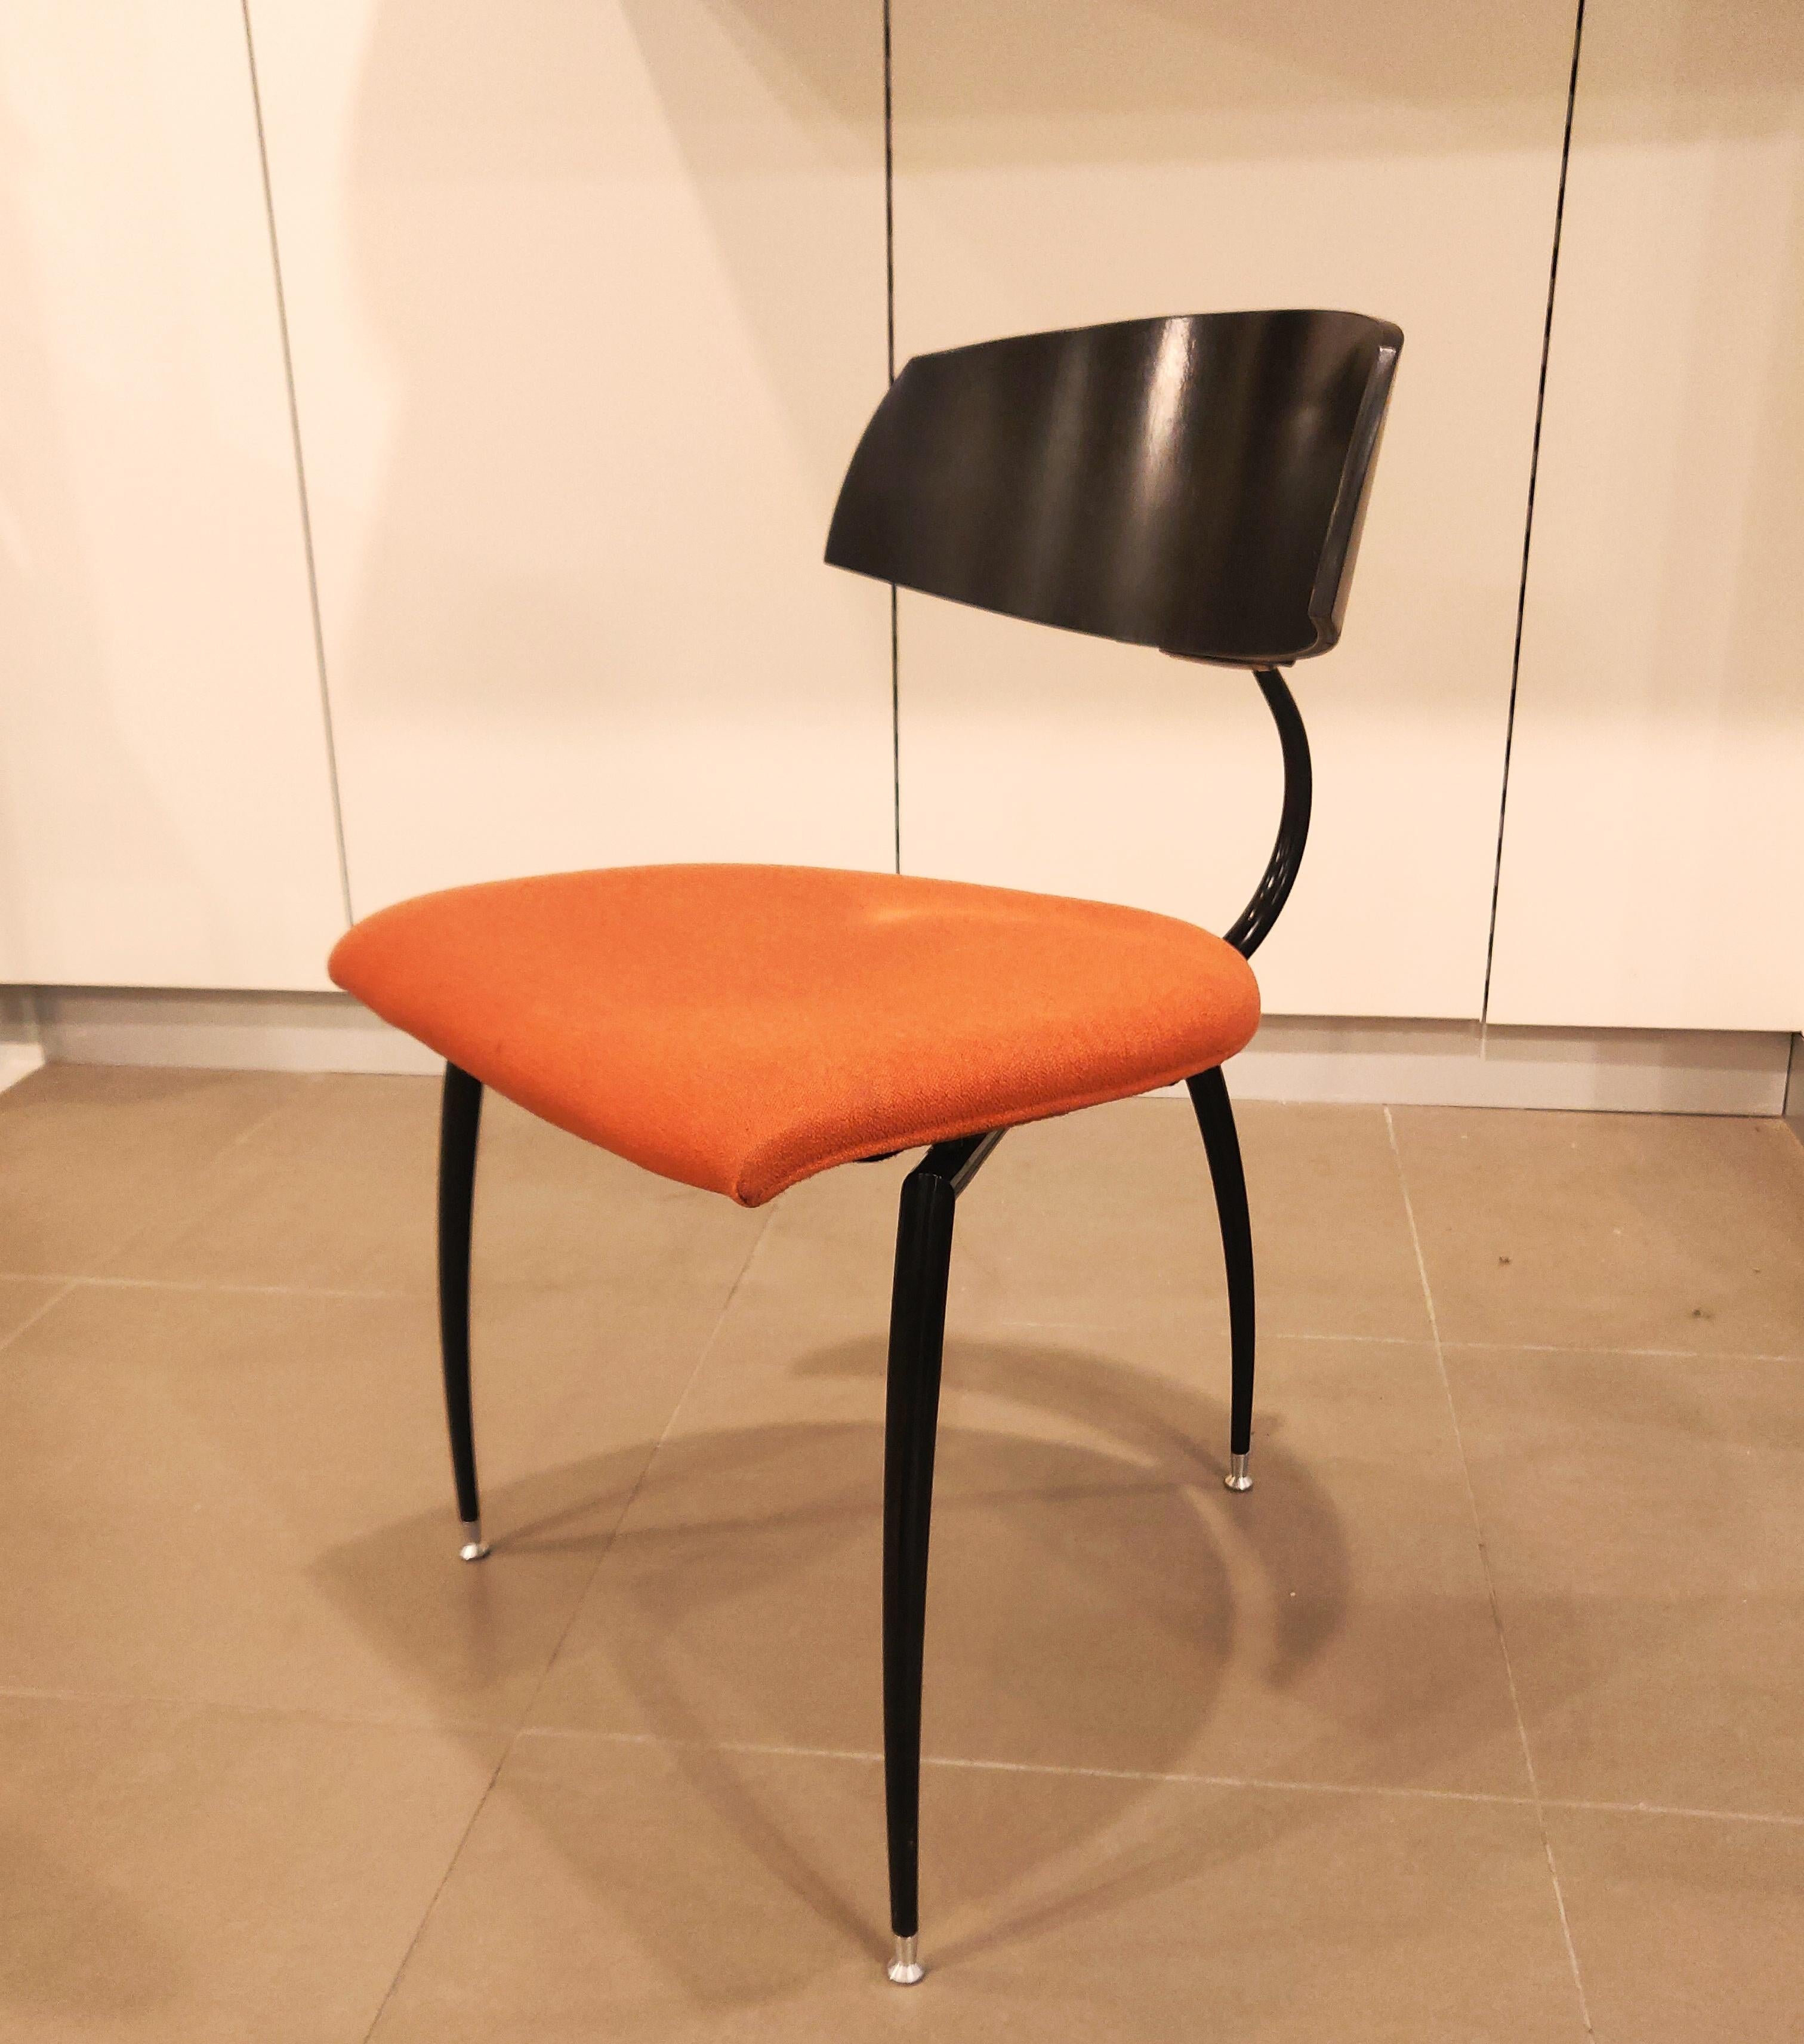 Late 20th Century Tripod Chair by Lande, Dutch Design, 1980s For Sale